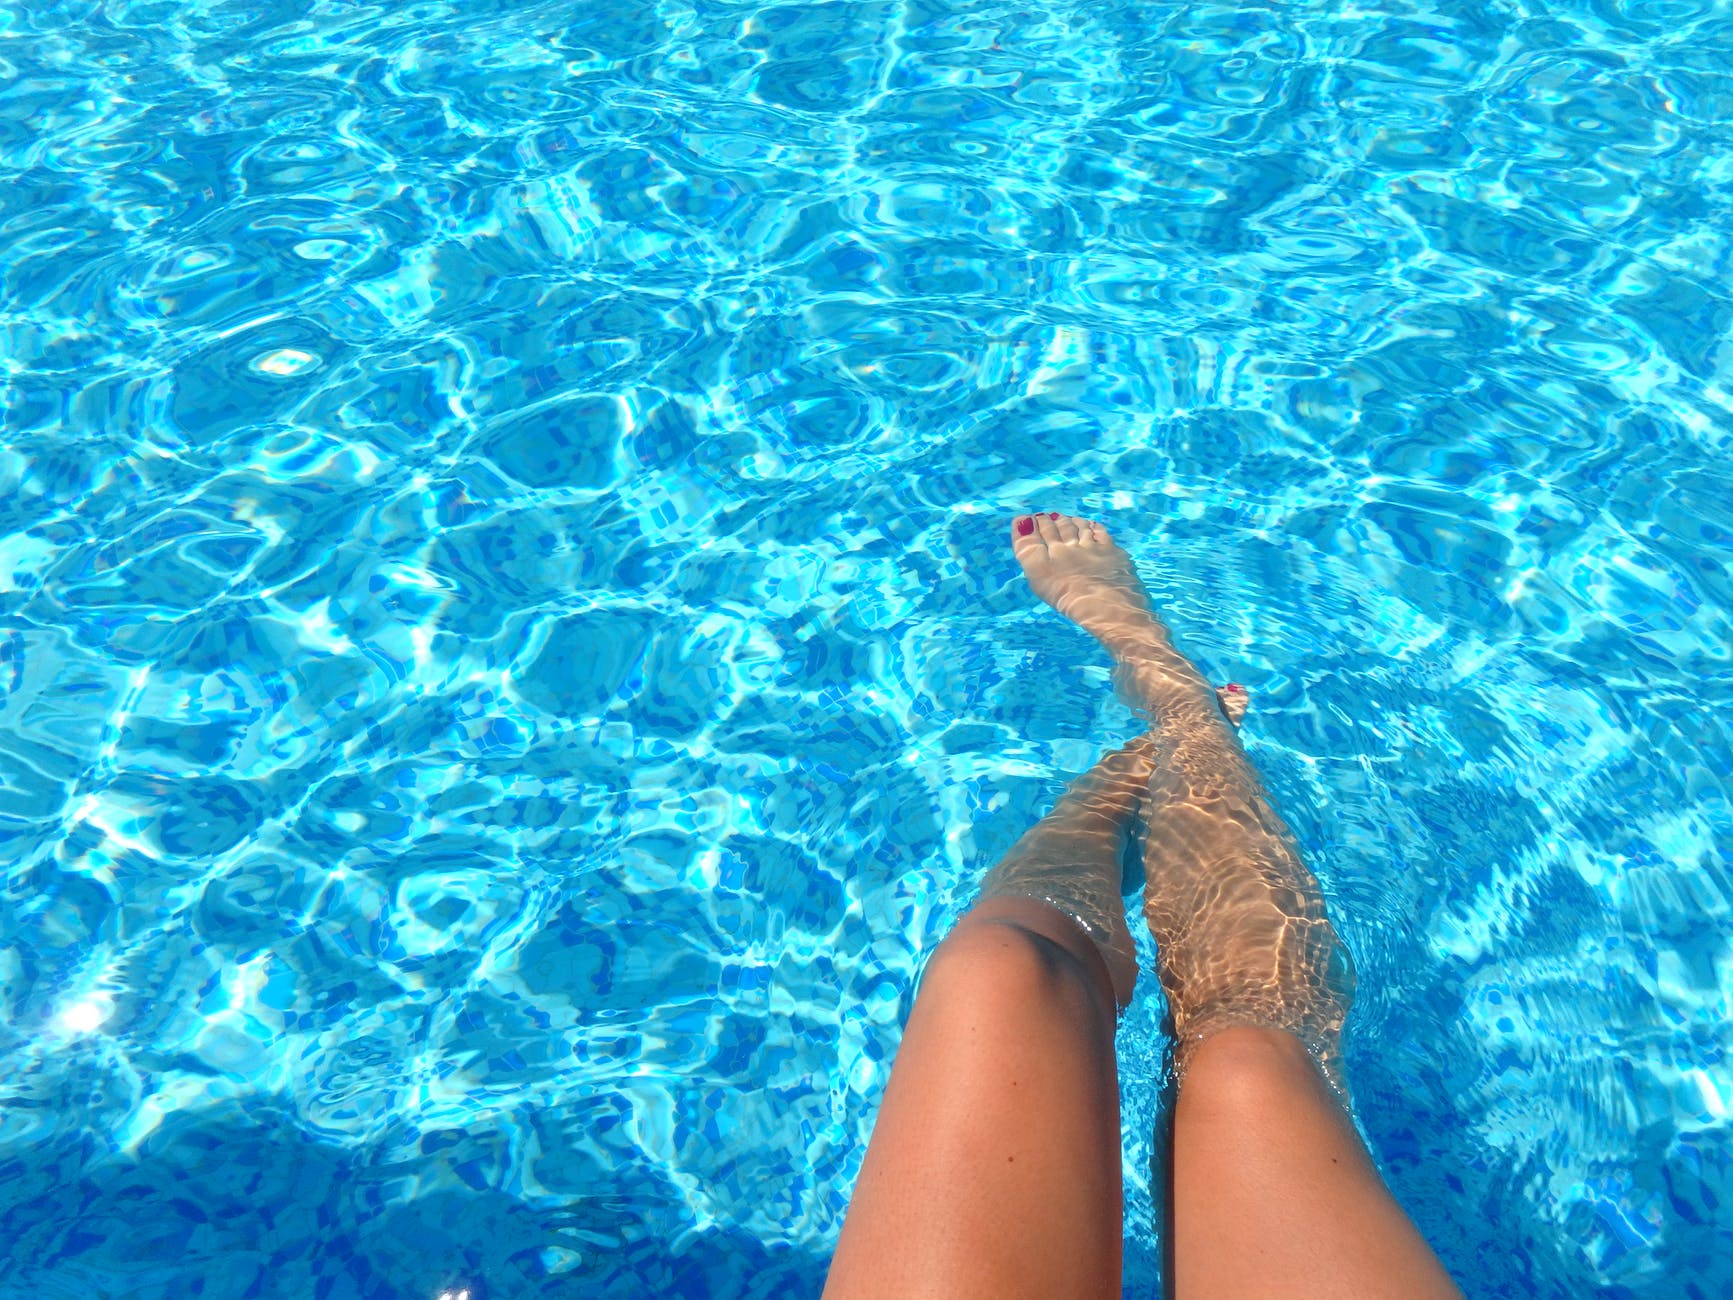 An image of a woman's legs floating in a clear blue swimming pool.